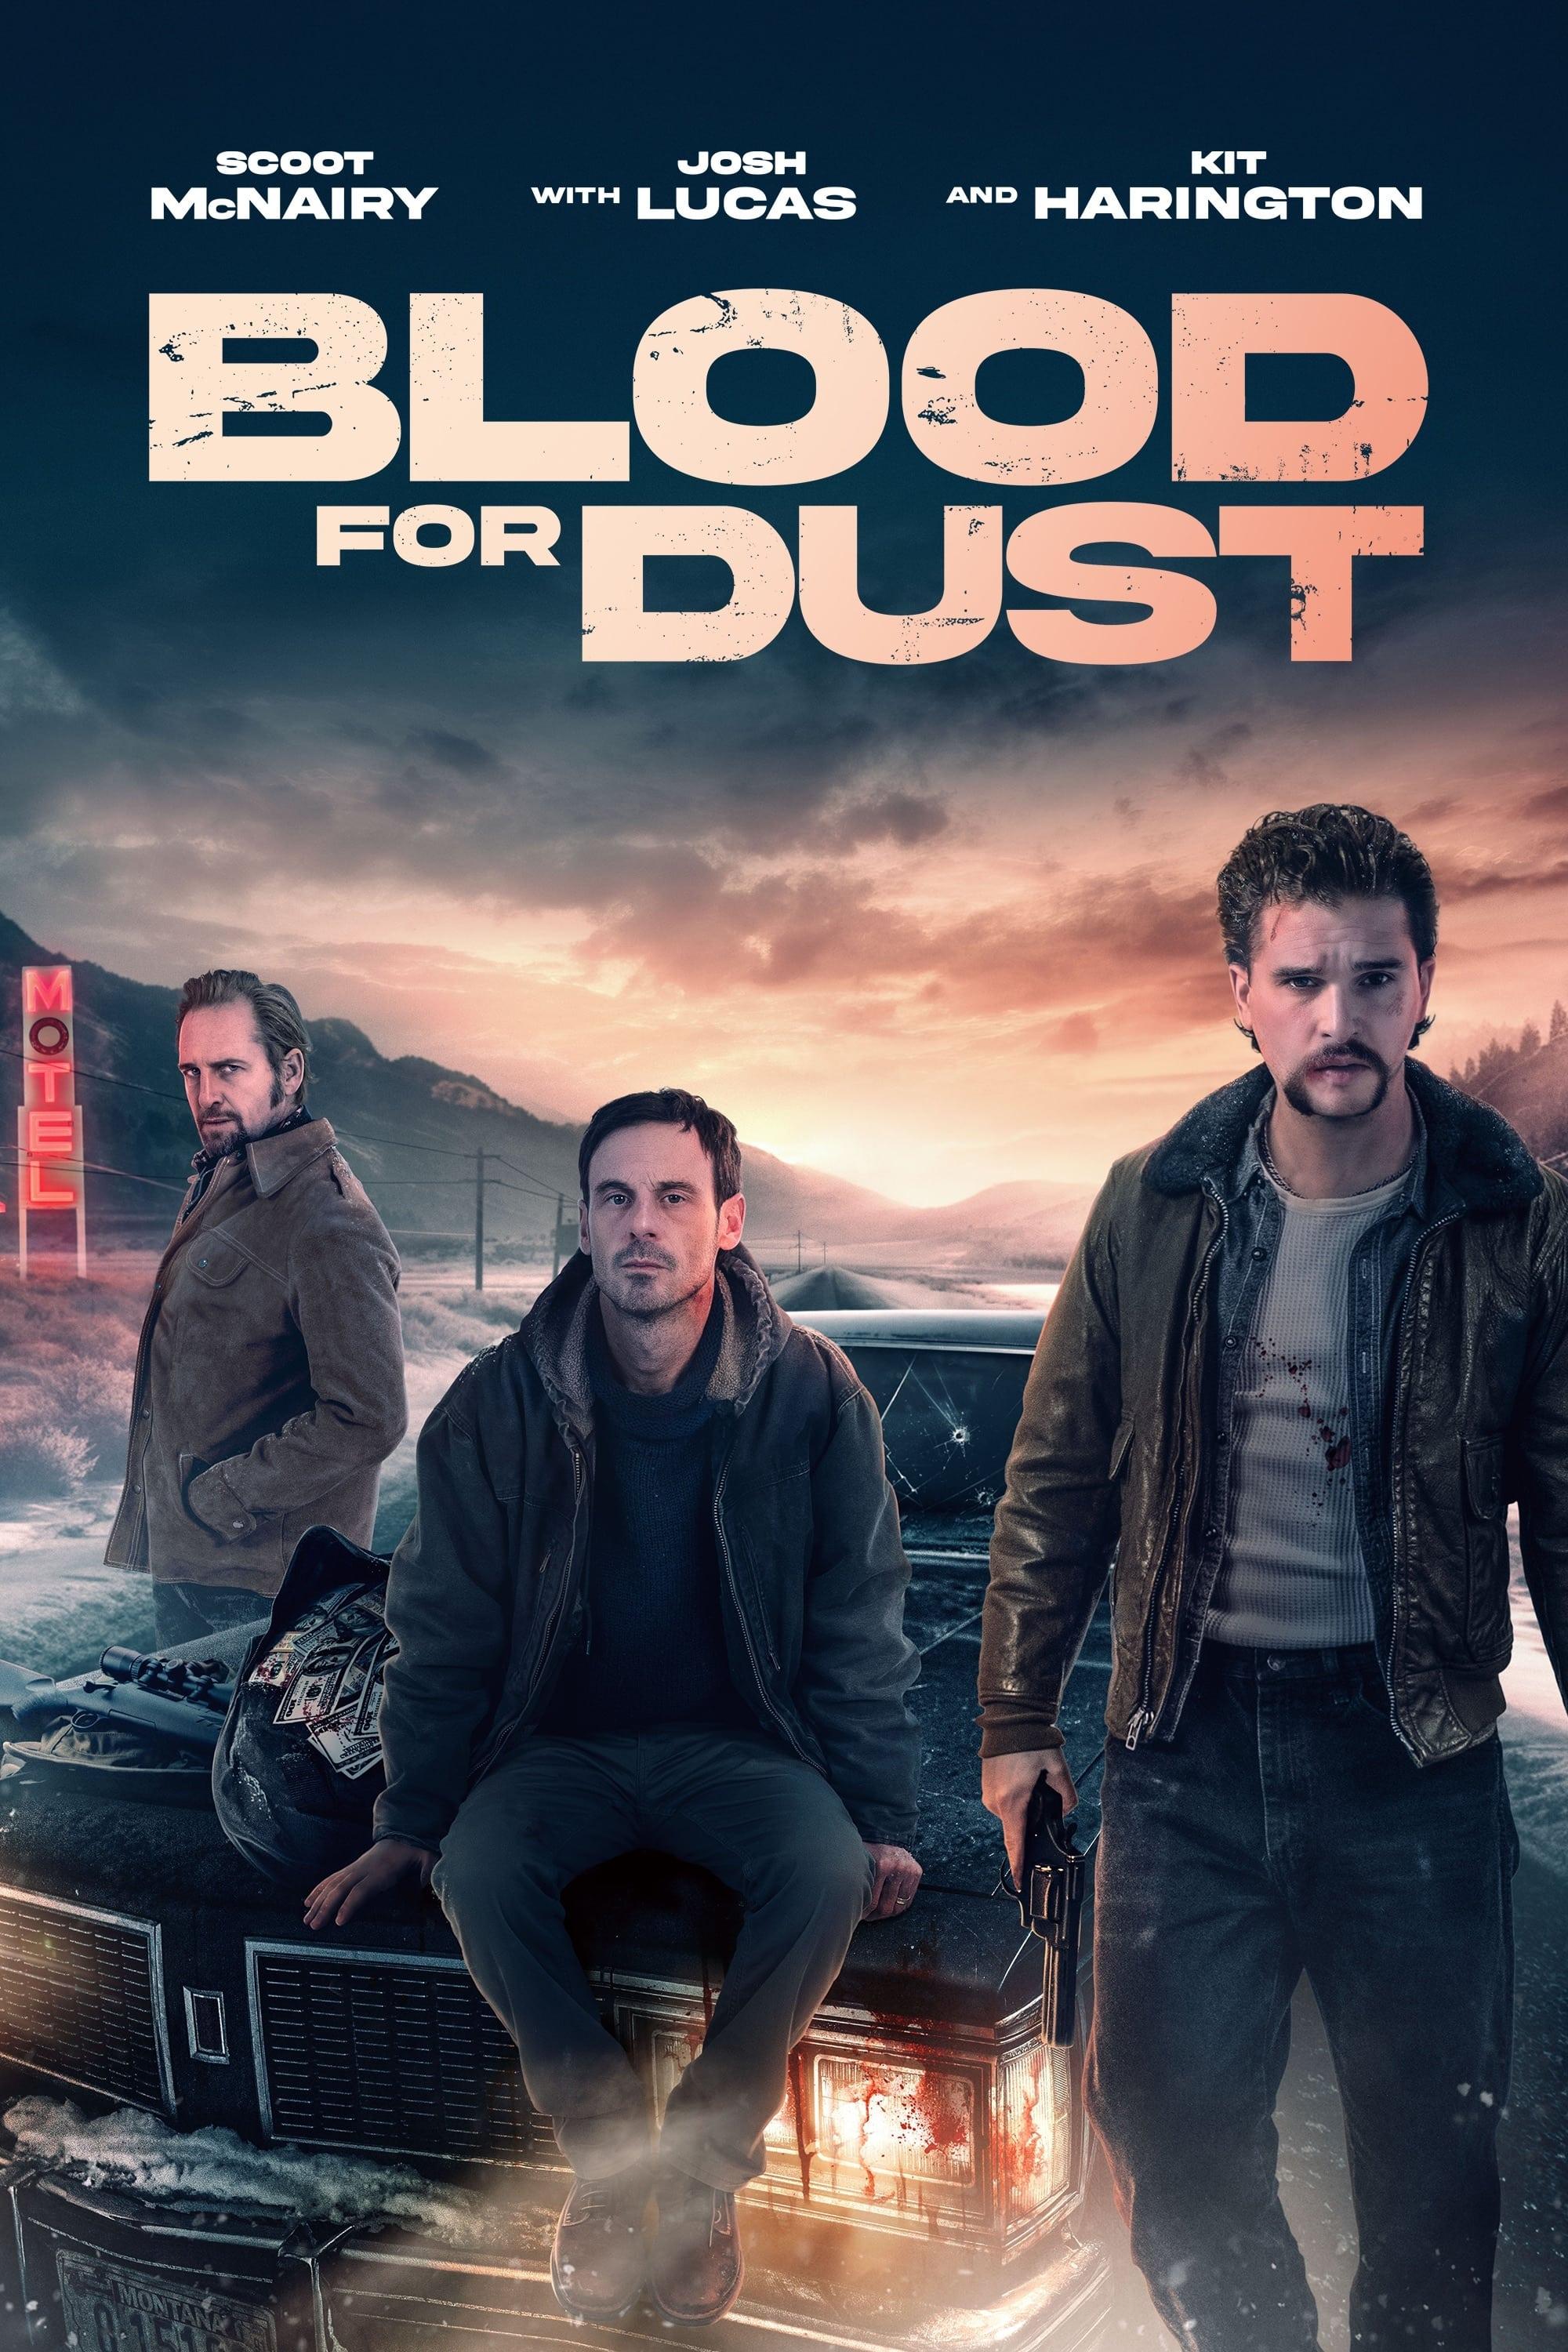 Blood for Dust poster